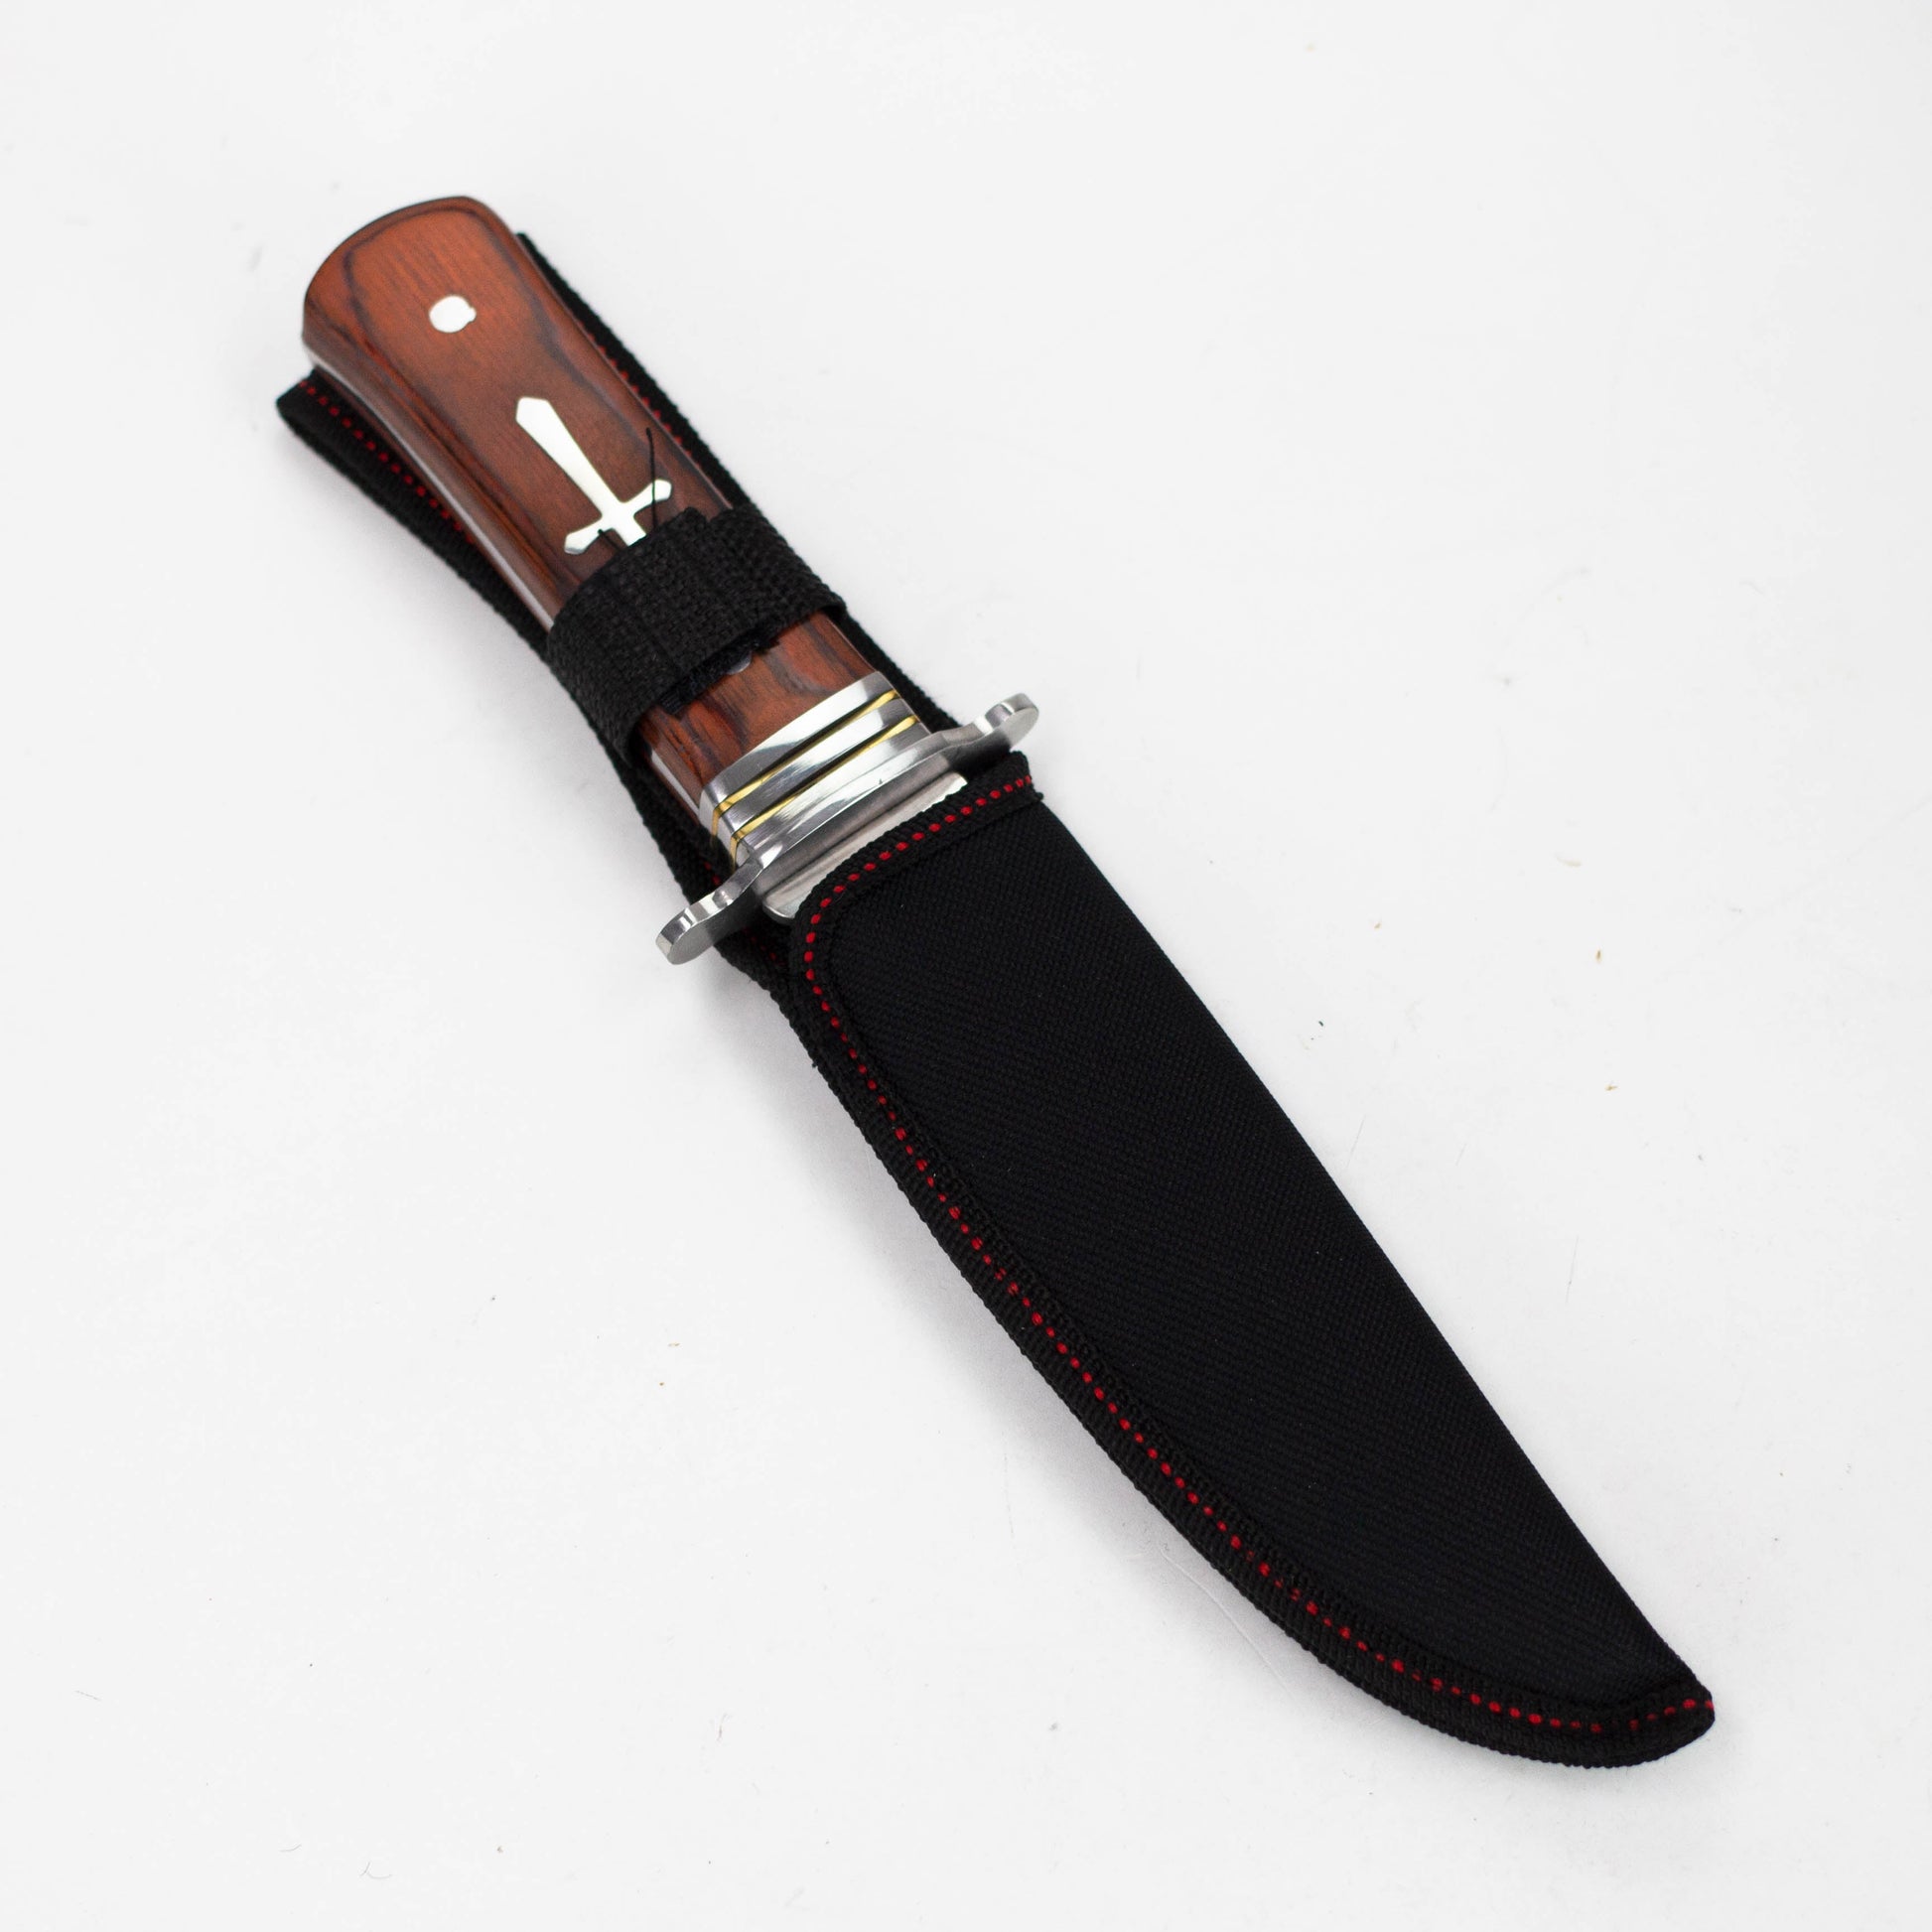 Defender-Xtream | 11" Hunting Knife Full Tang Stainless Steel Blade with Wood Handle [8155]_1